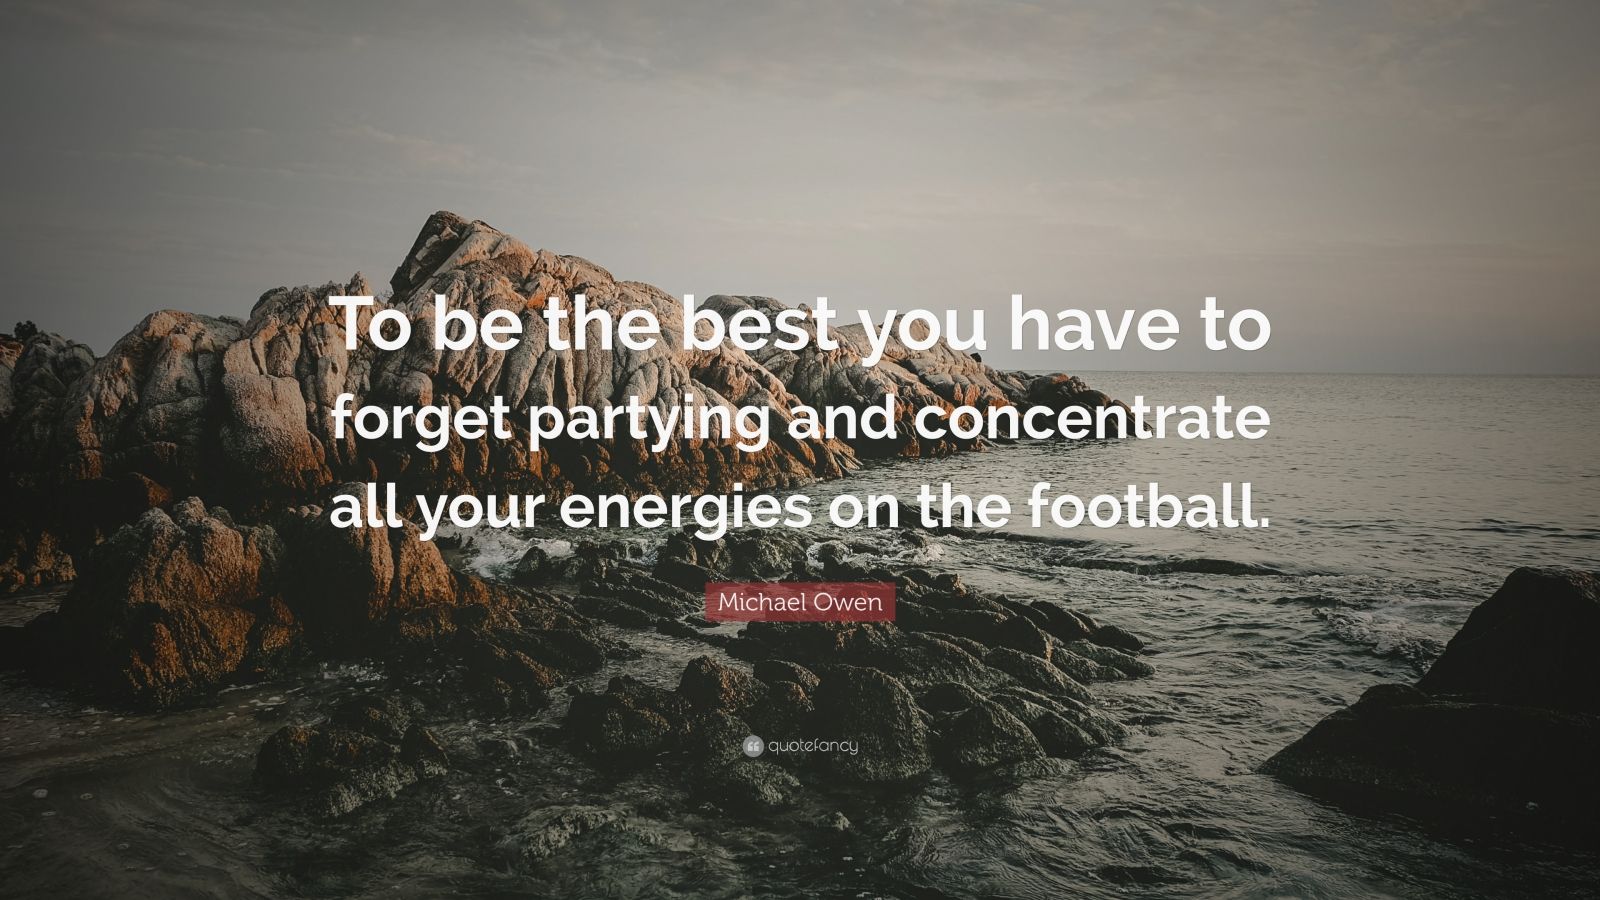 Michael Owen Quote: “To be the best you have to forget partying and